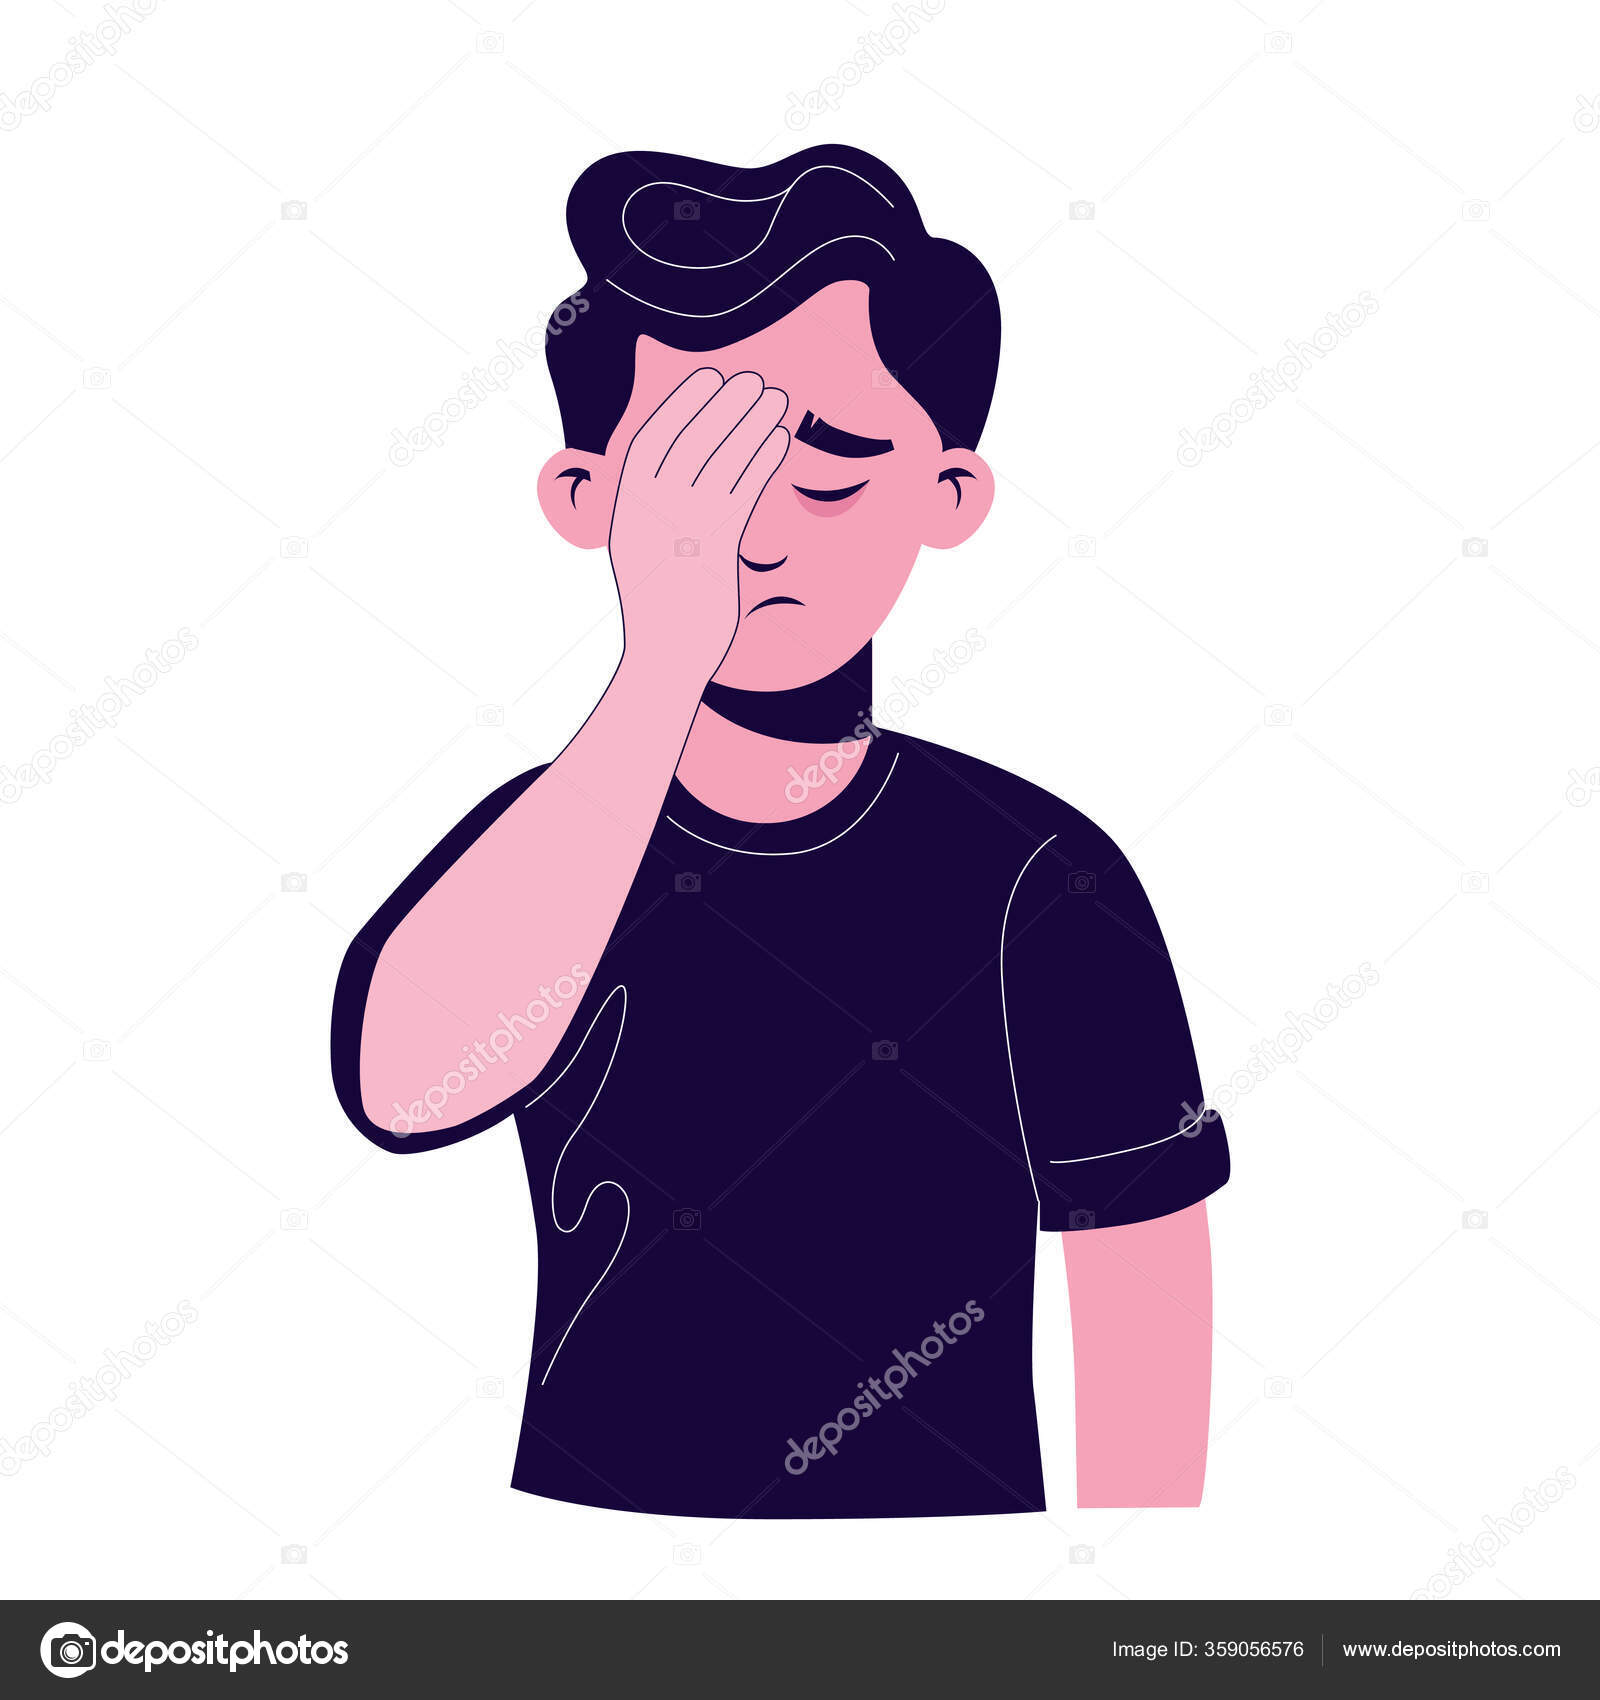 Guy meme face for any design isolated eps Vector Image